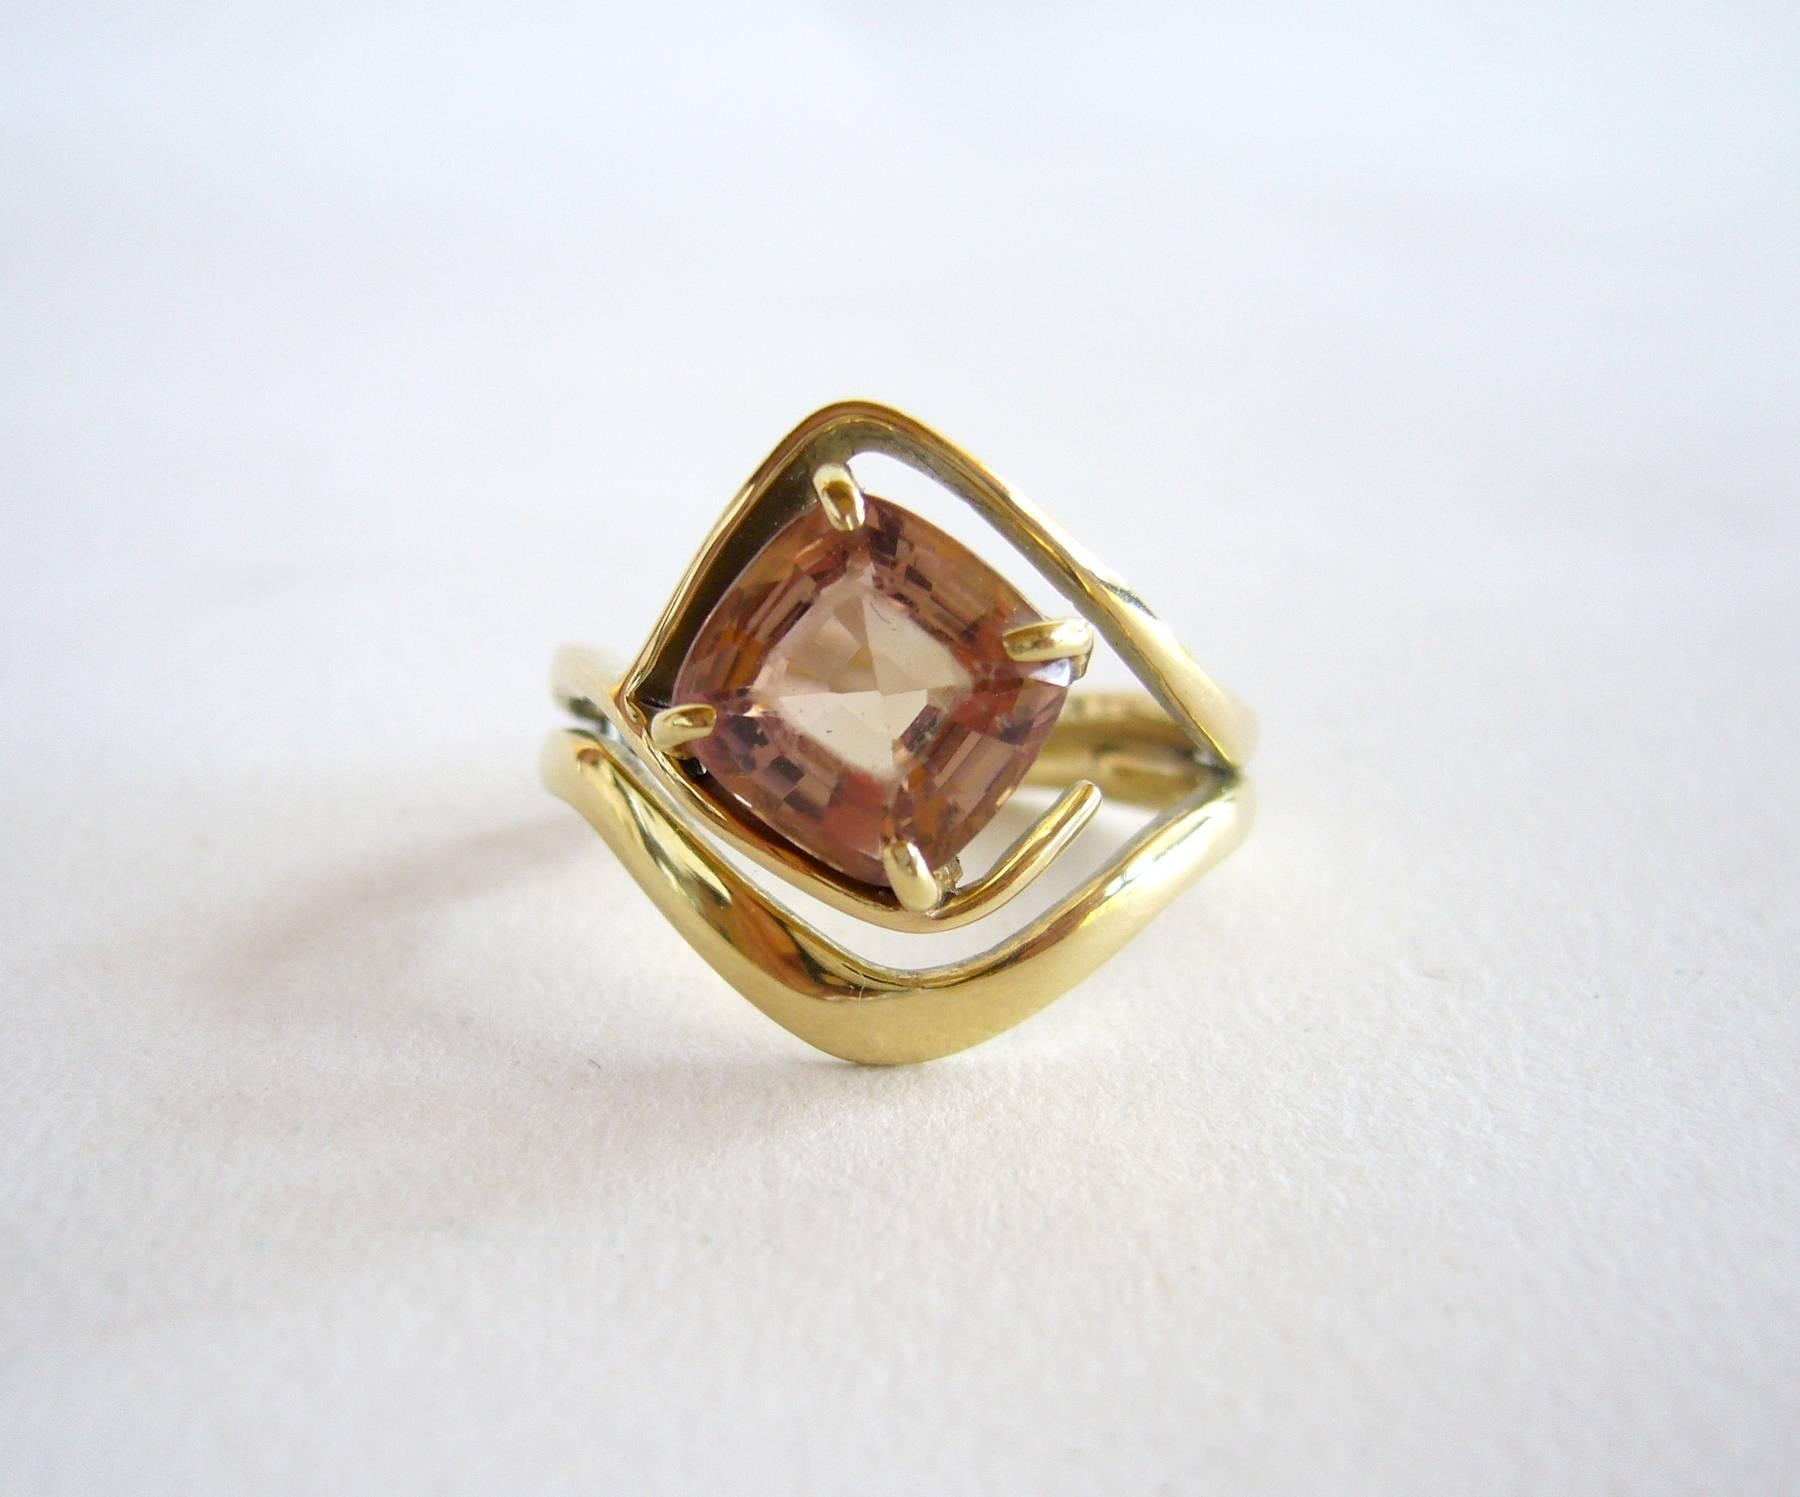 Gold ring with faceted tourmaline created by modernist jeweler Jack Nutting of San Francisco, California.  Ring is comprised of a stunning champagne tourmaline stone set in a free form setting.  Finger size 6 and suitable for an engagement or